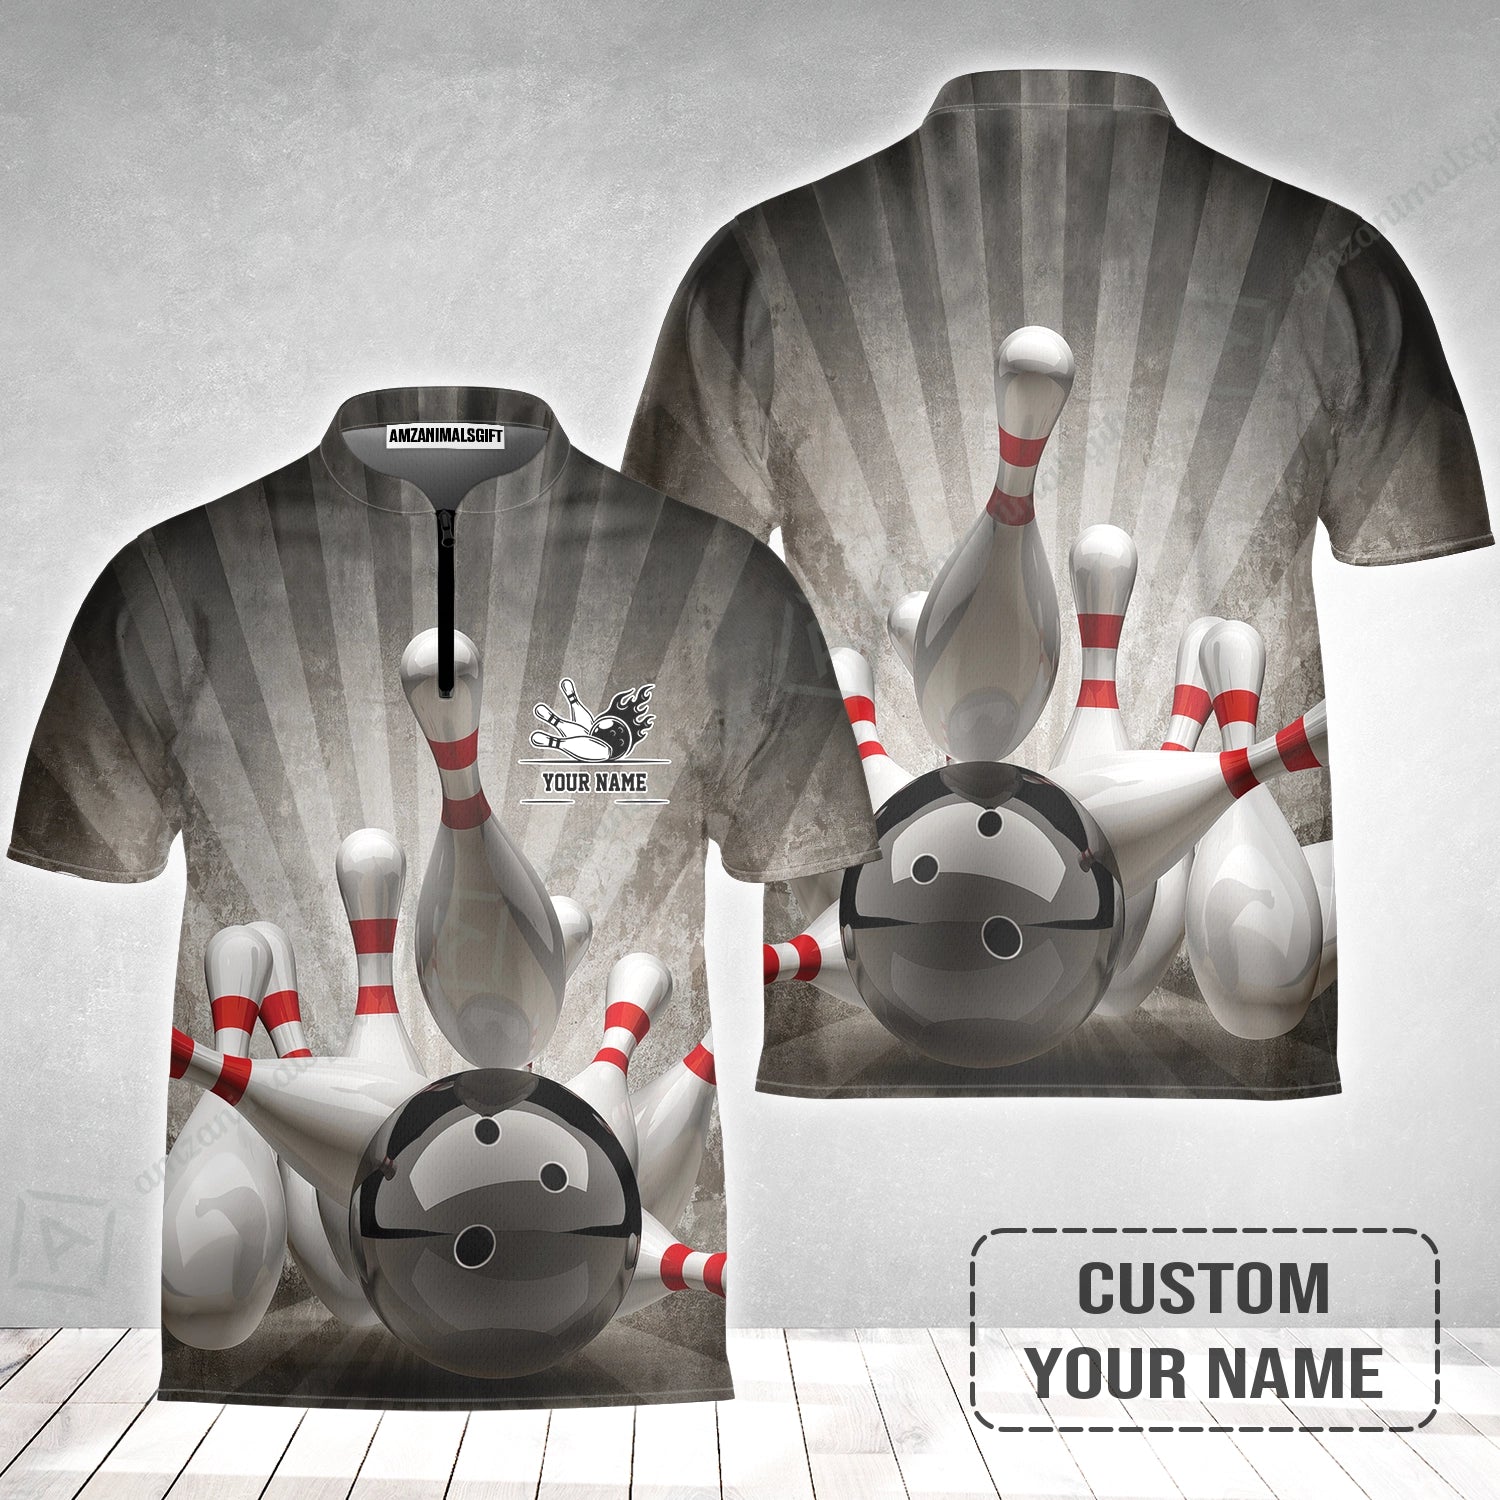 Customized Name Bowling Jersey, Bowling Apparel For Men And Women, Bowling Team - Perfect Outfit For Bowling Lovers, Bowlers